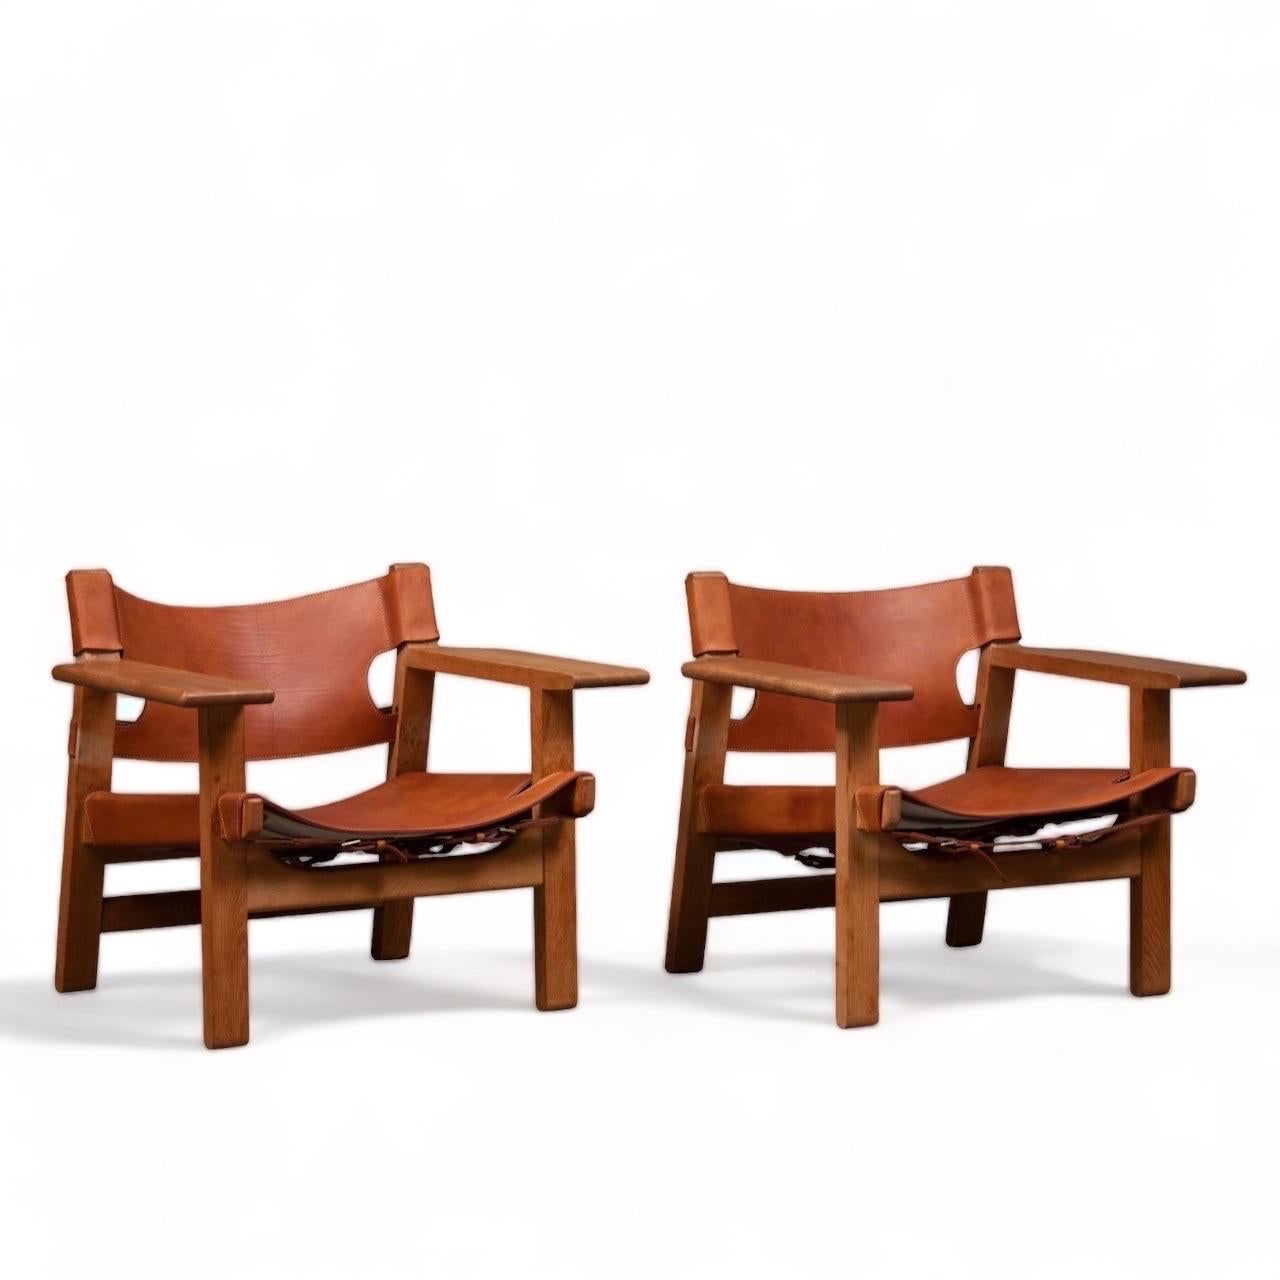 Børge Mogensen for Fredericia Stolefabrik, pair of 'Spanish Chairs,' oak, leather, brass, Denmark, design 1958

This well-known design by Børge Mogensen has a very strong appearance. The sincere construction and type of upholstery, give the chair a